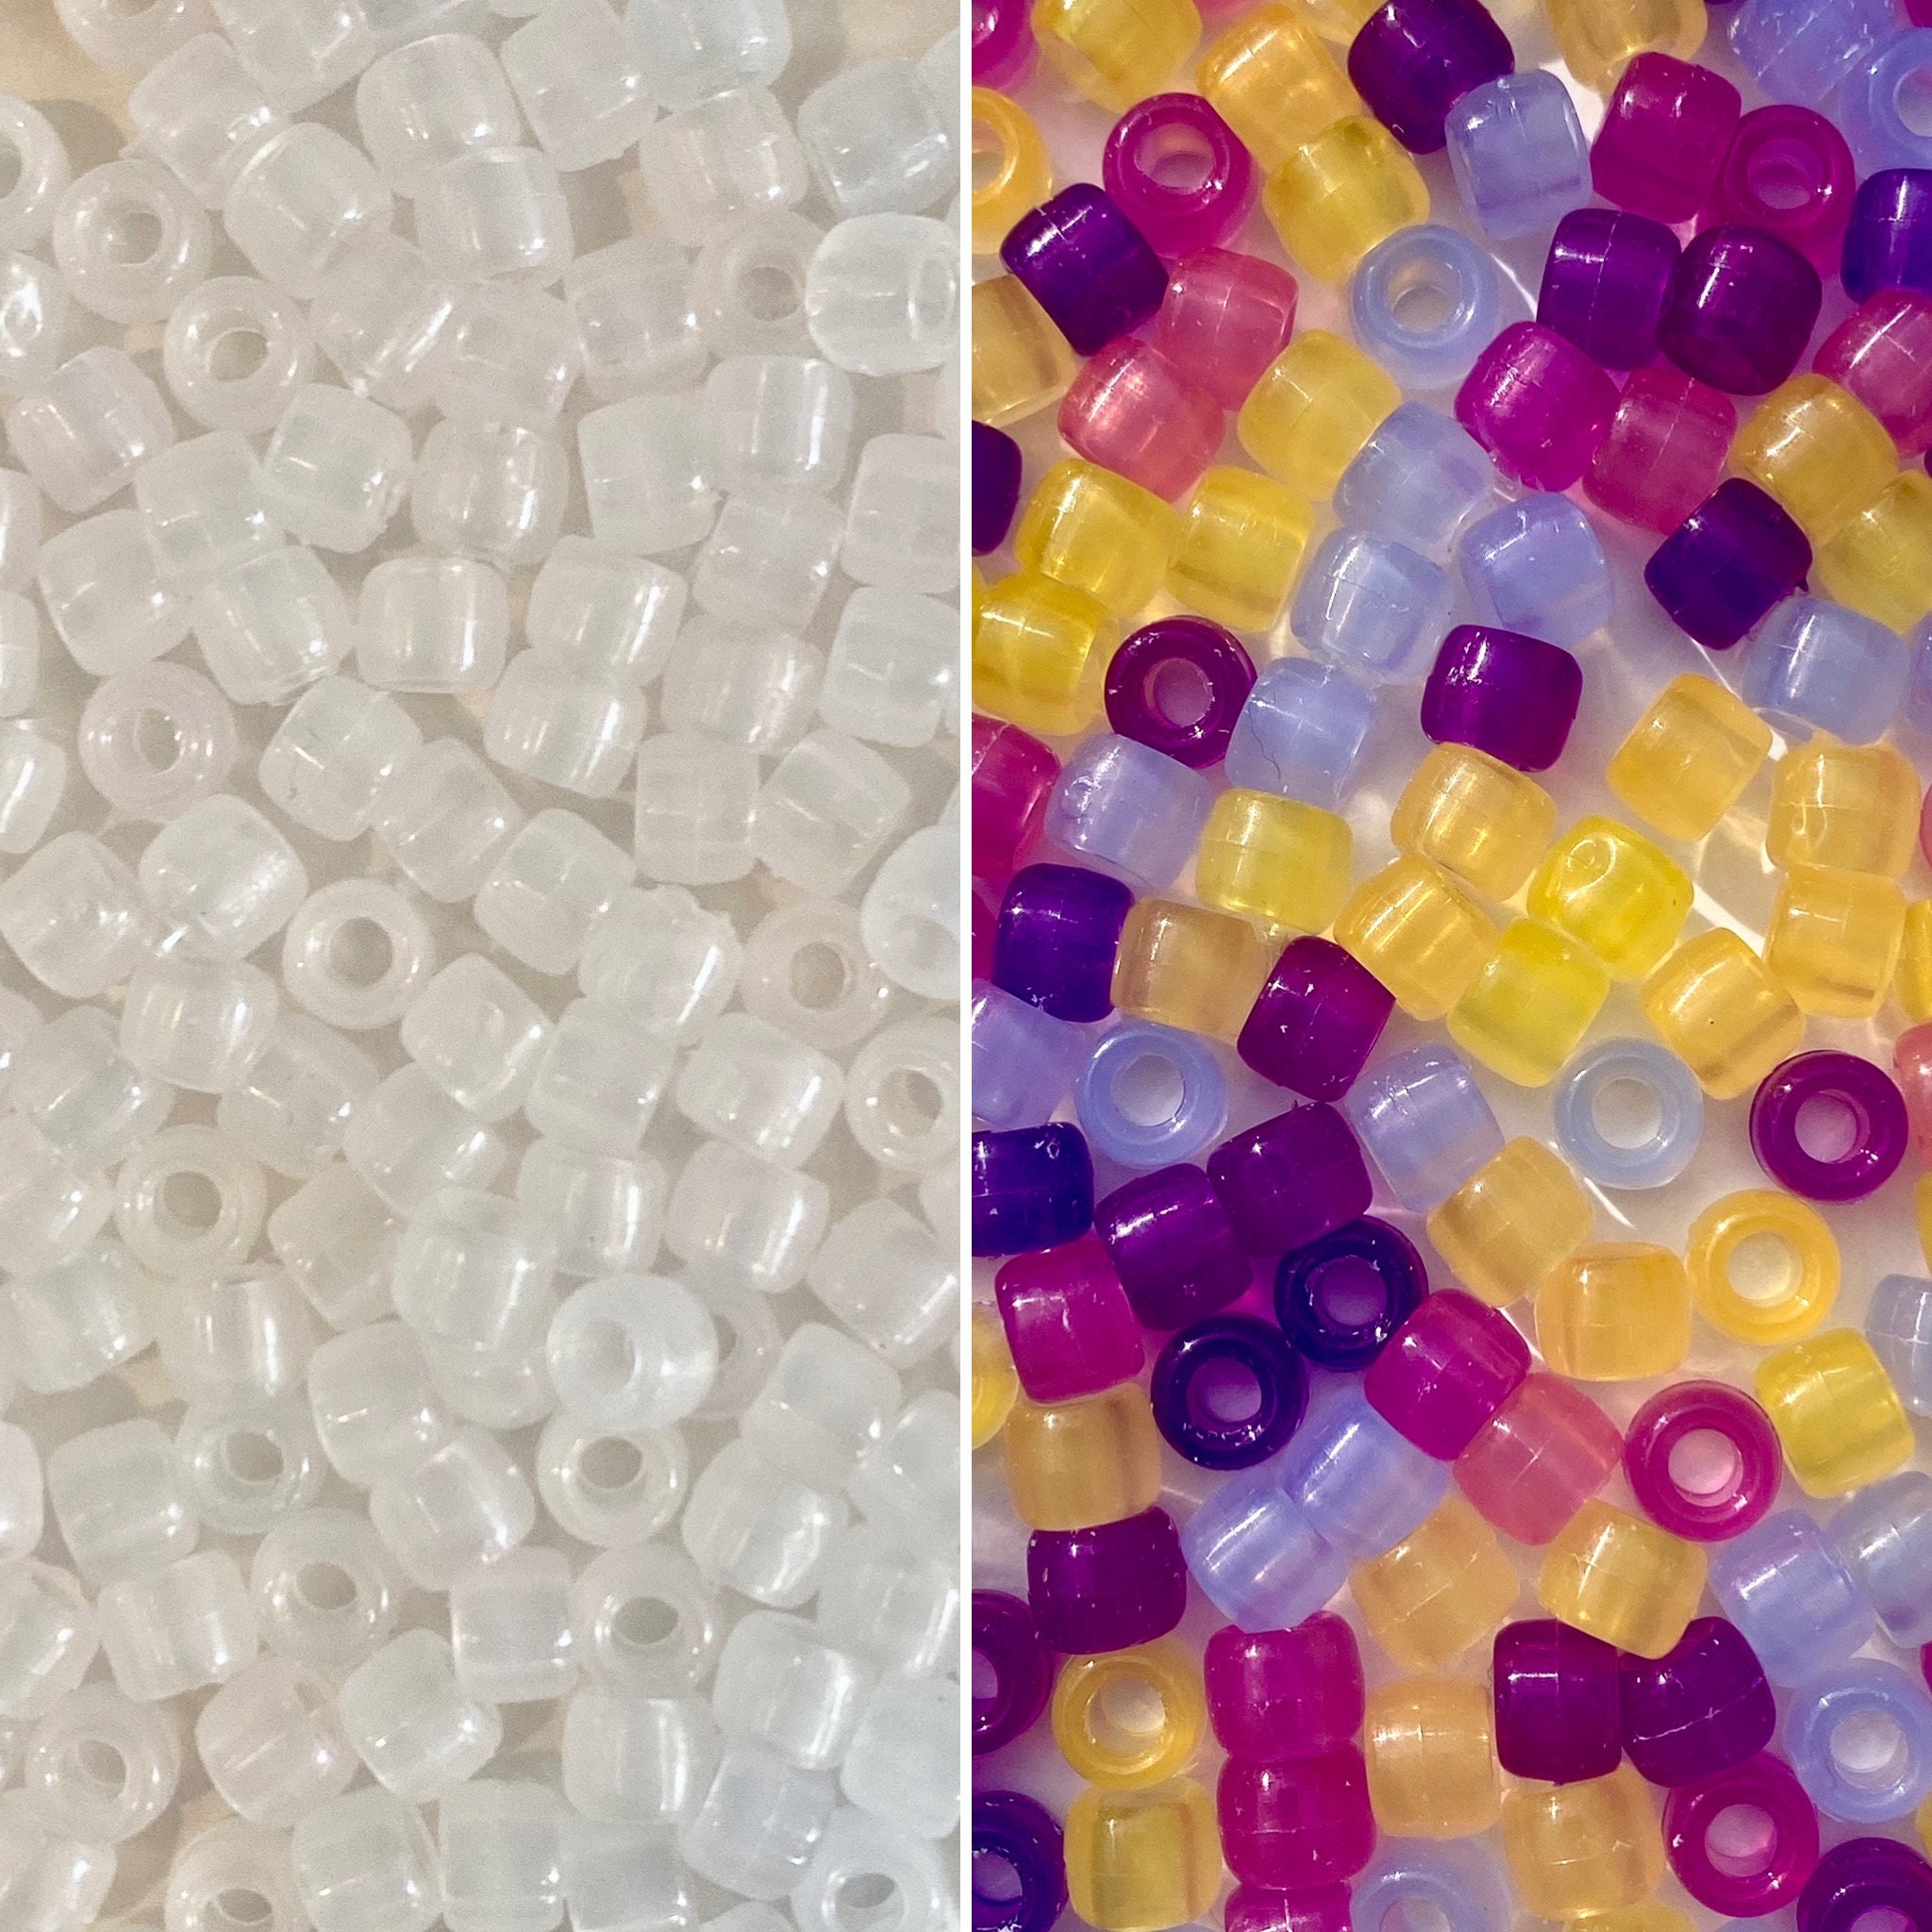 UV Sensitive Pony Beads UV Beads for Smart Jewelry & Science Craft Projects  Photosensitive Photochromic Pigment Changes Color in Sun 